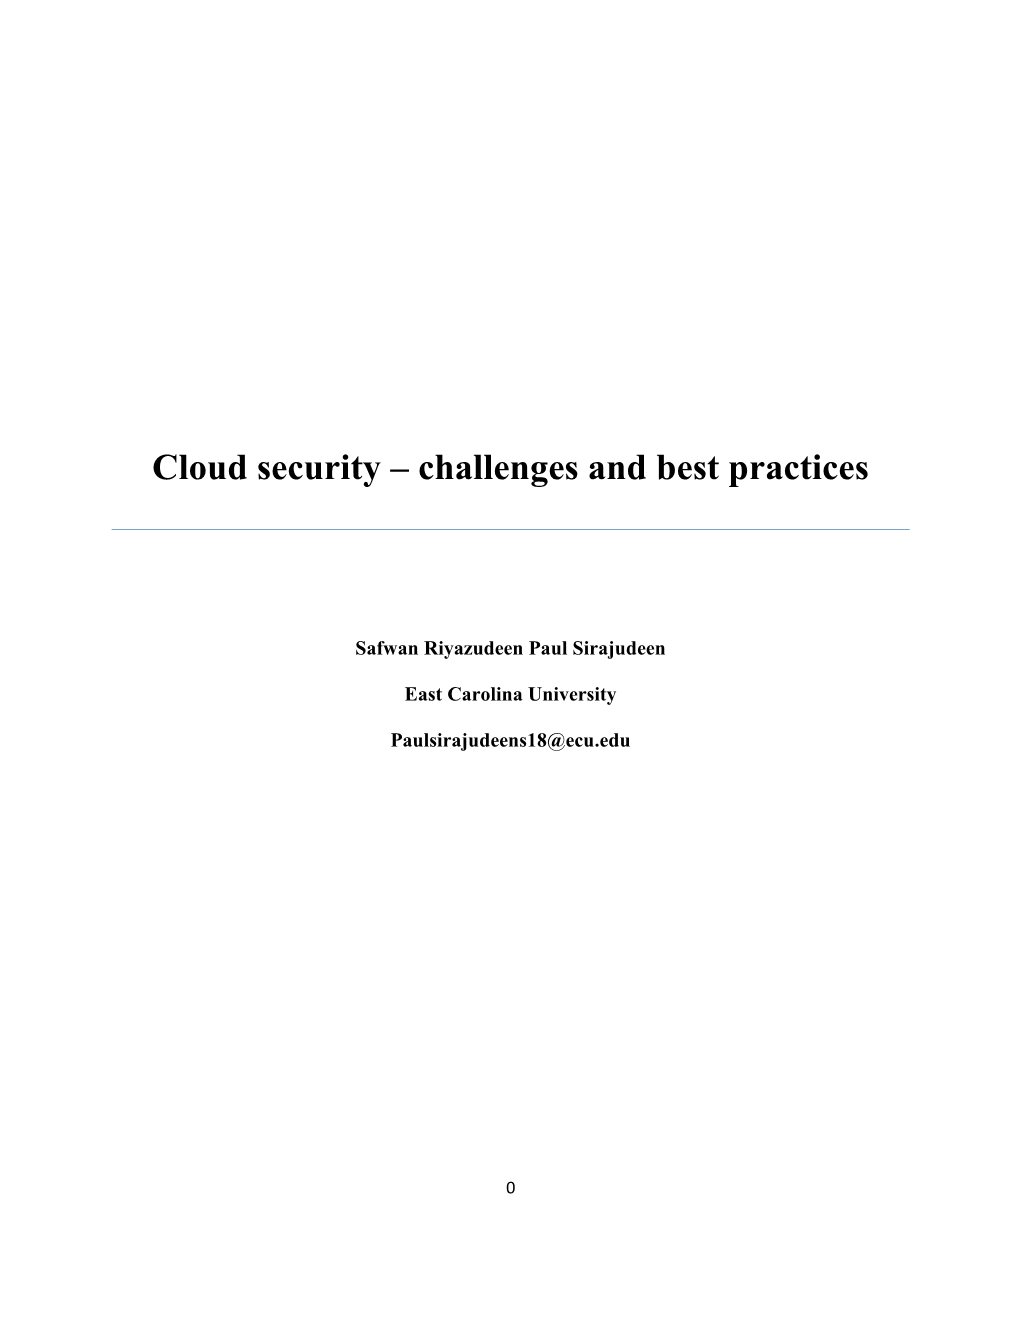 Cloud Security – Challenges and Best Practices